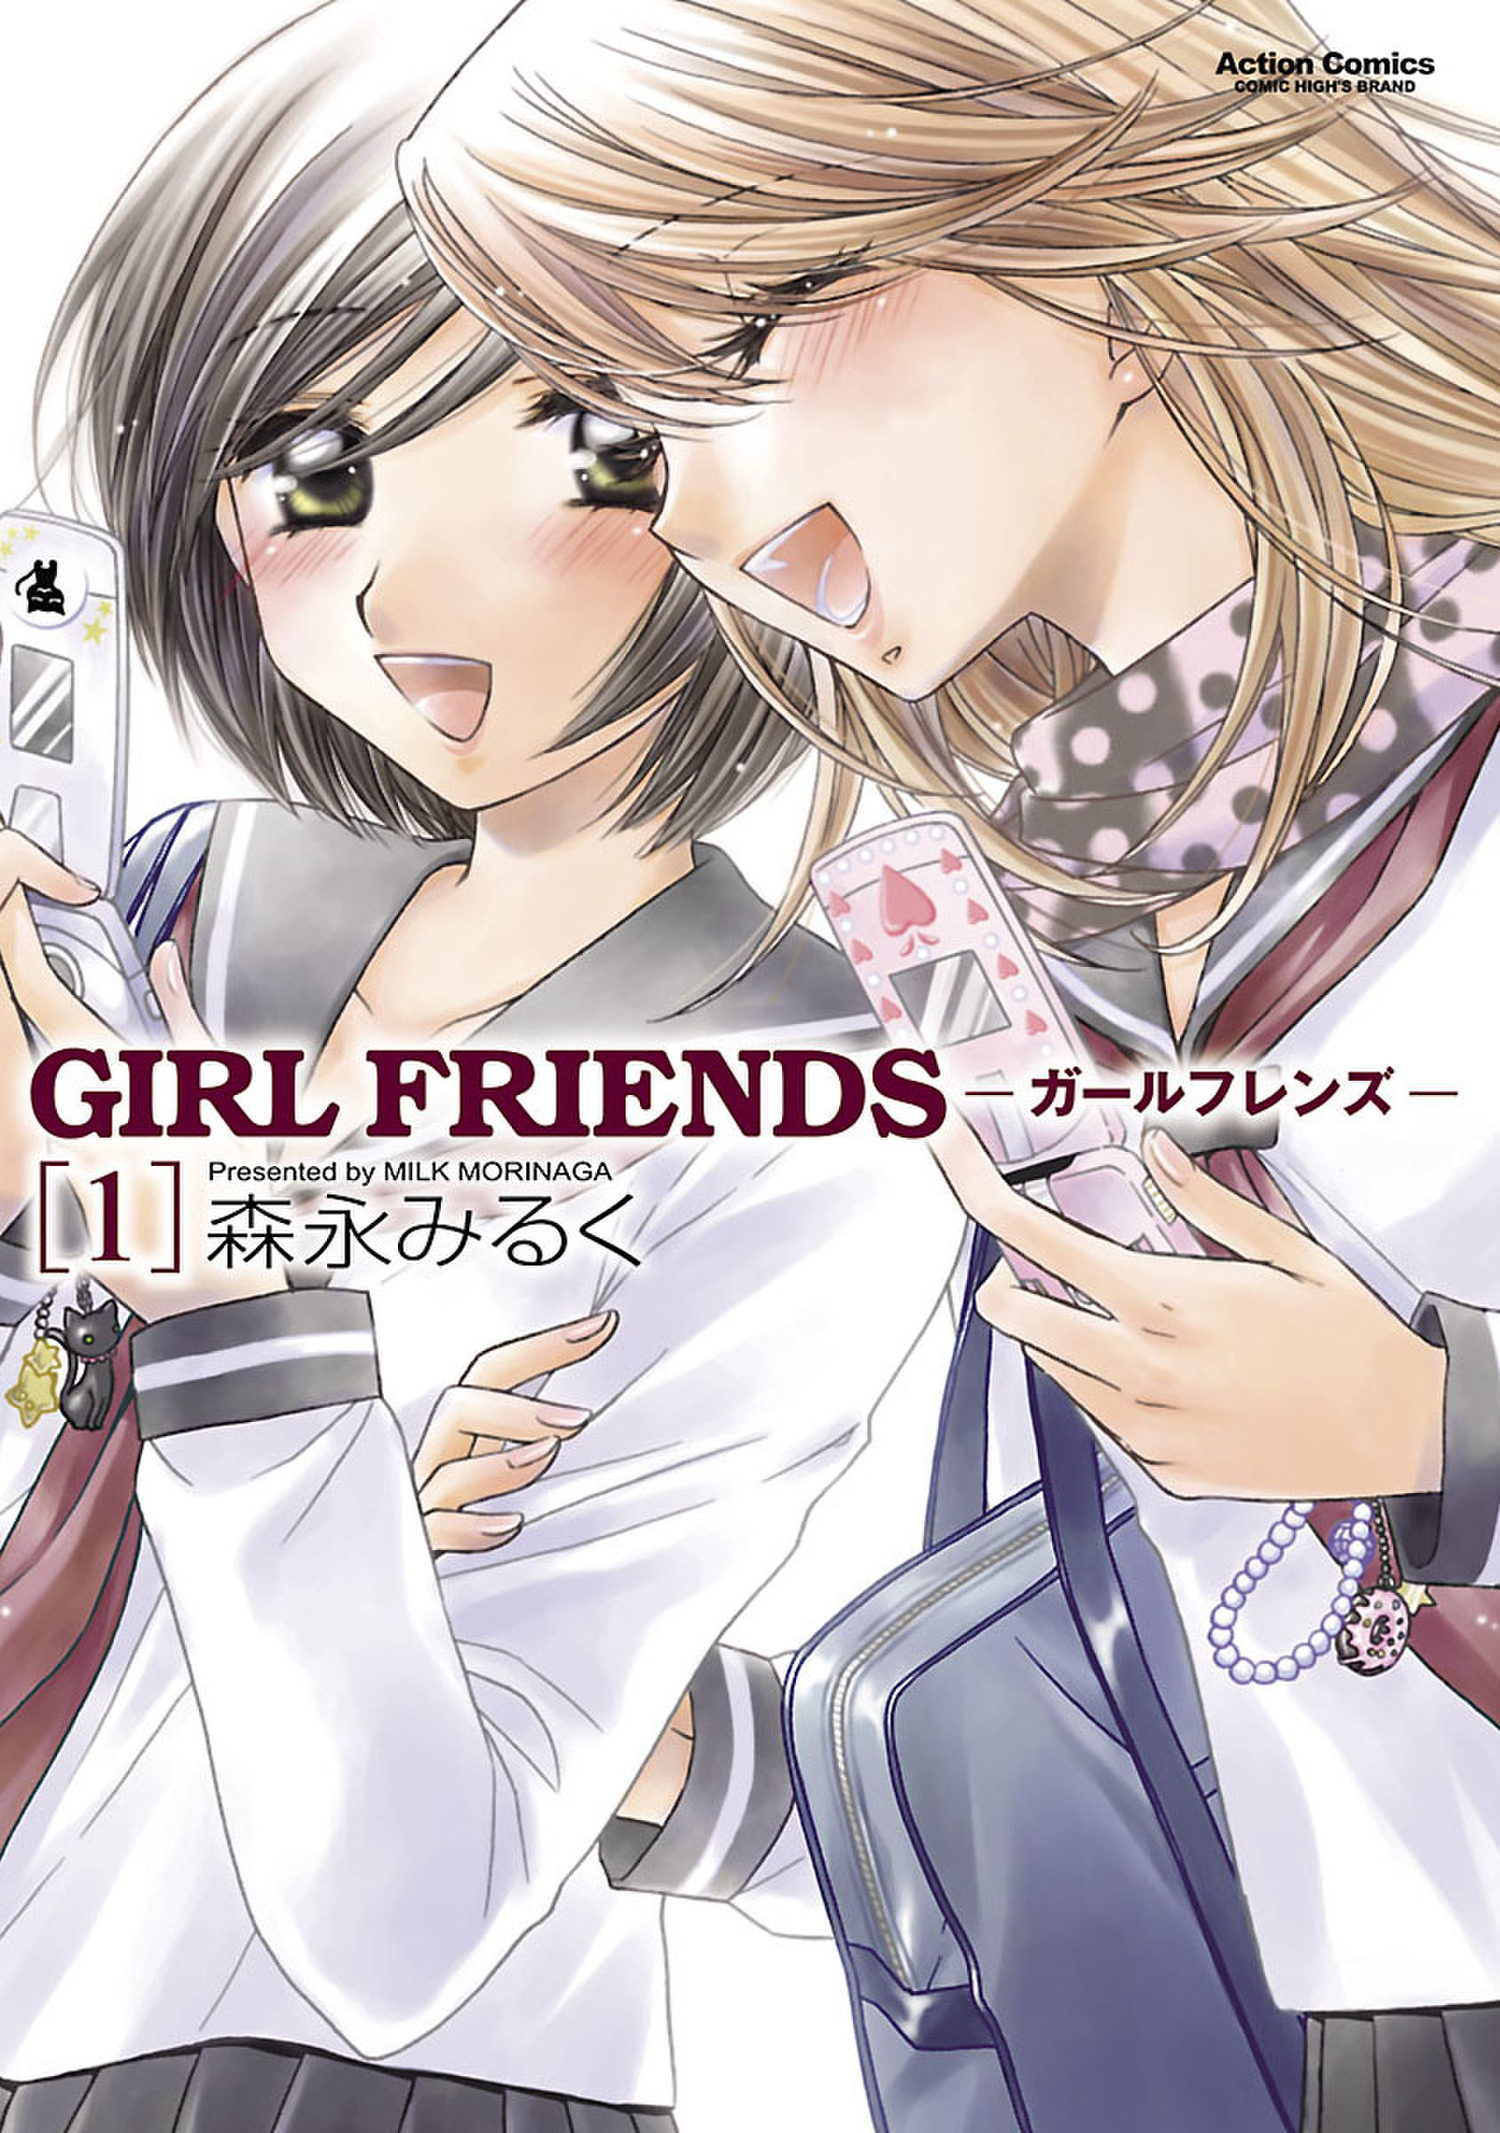 Girl Friends cover